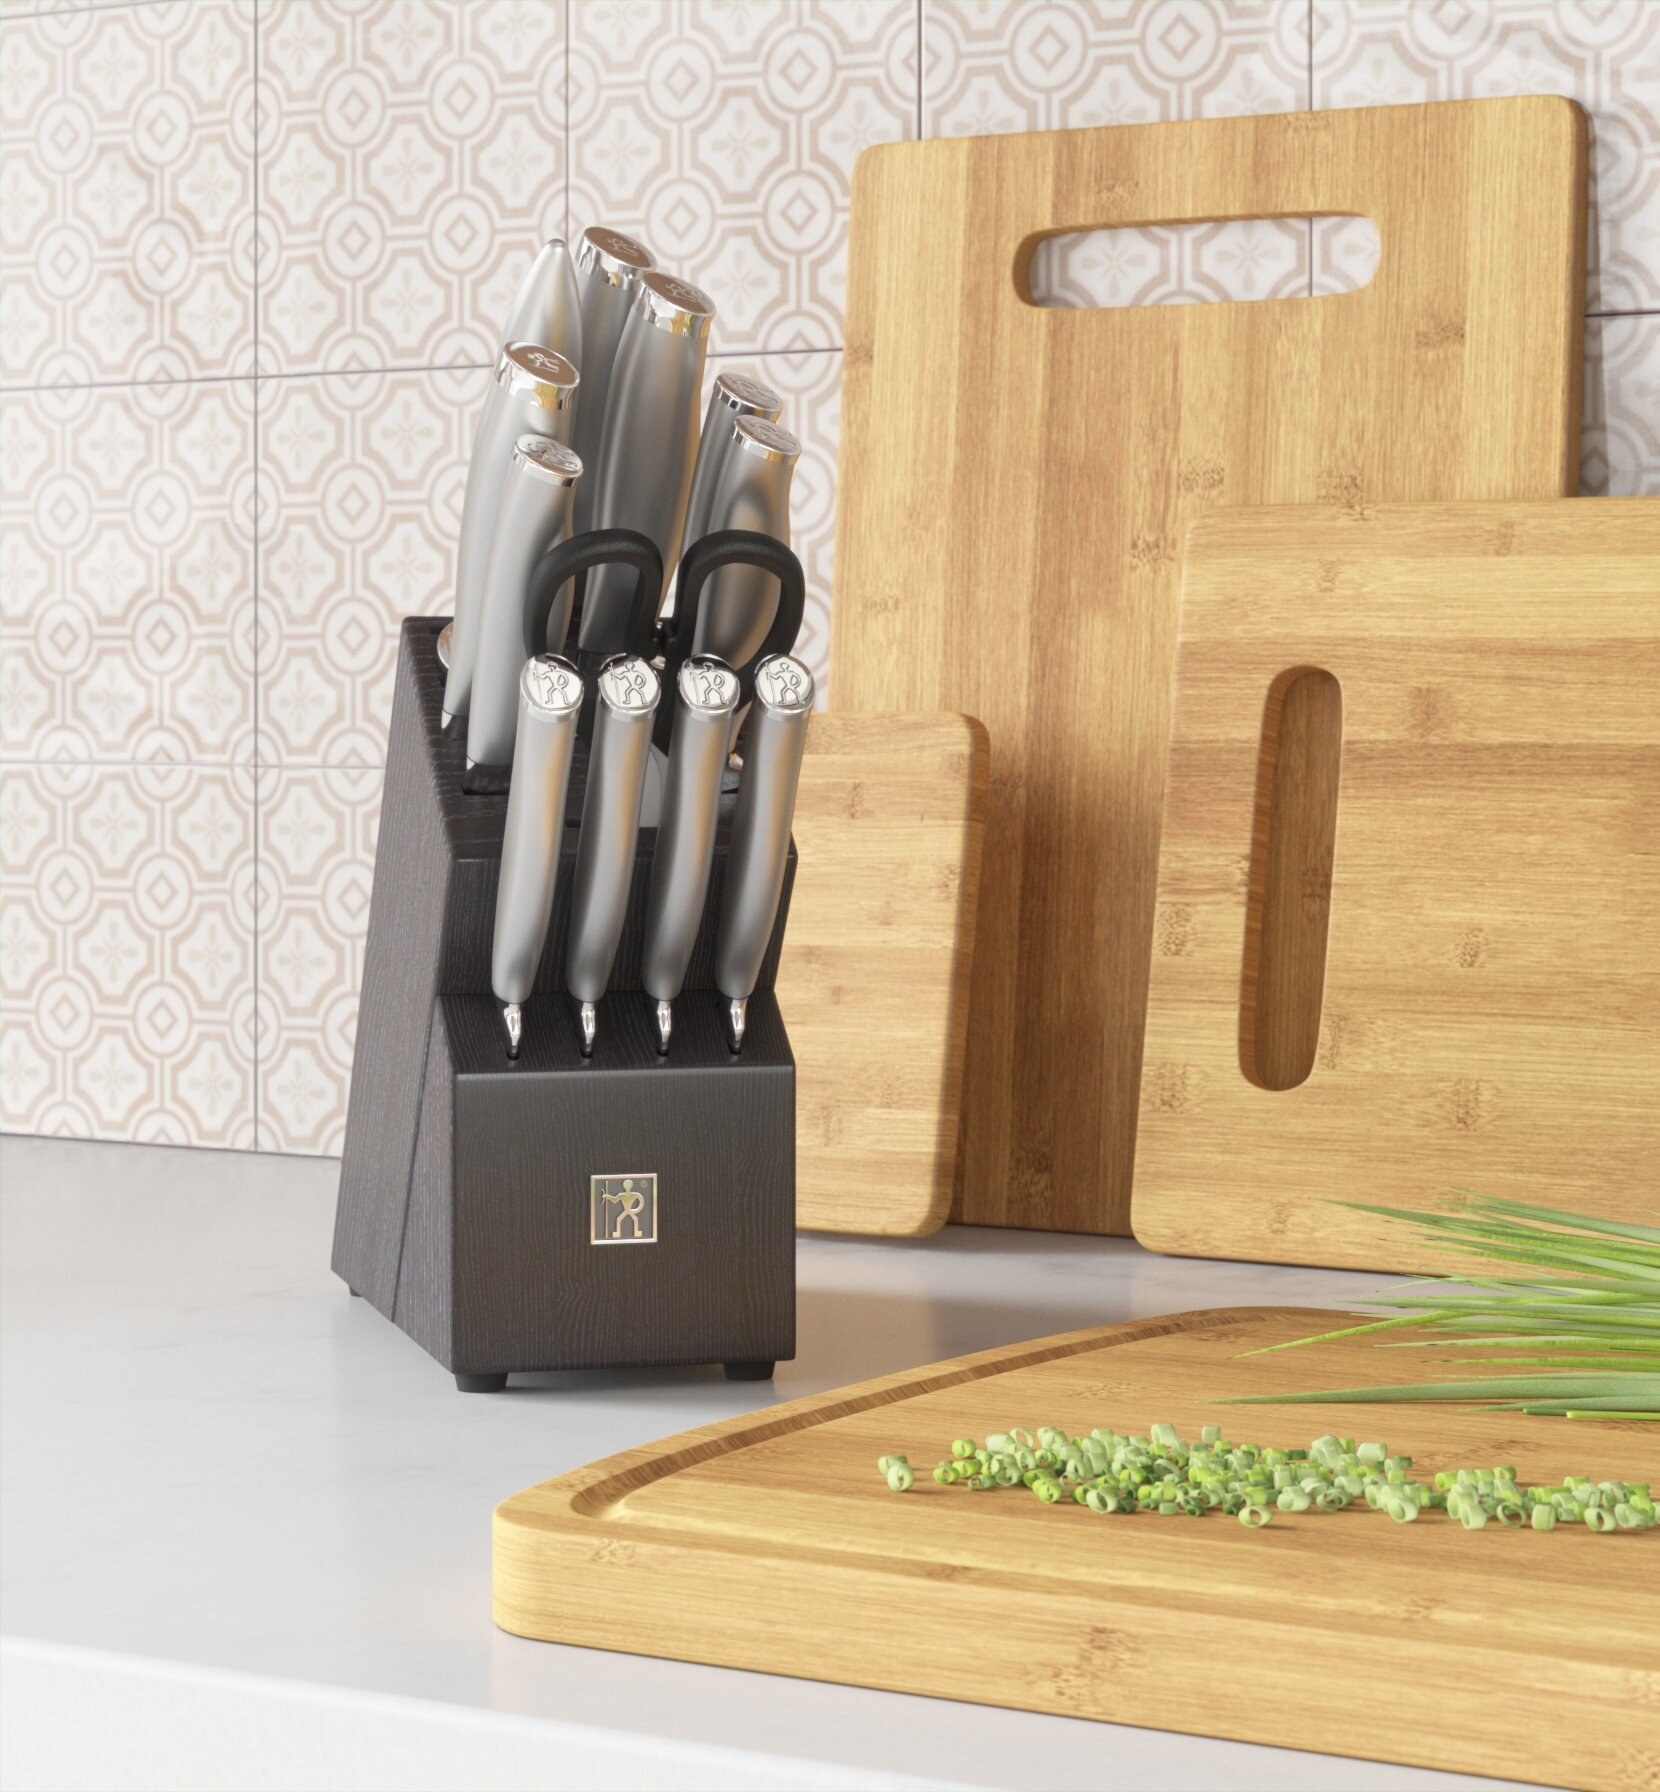 knife set on a kitchen countertop next to cutting boards